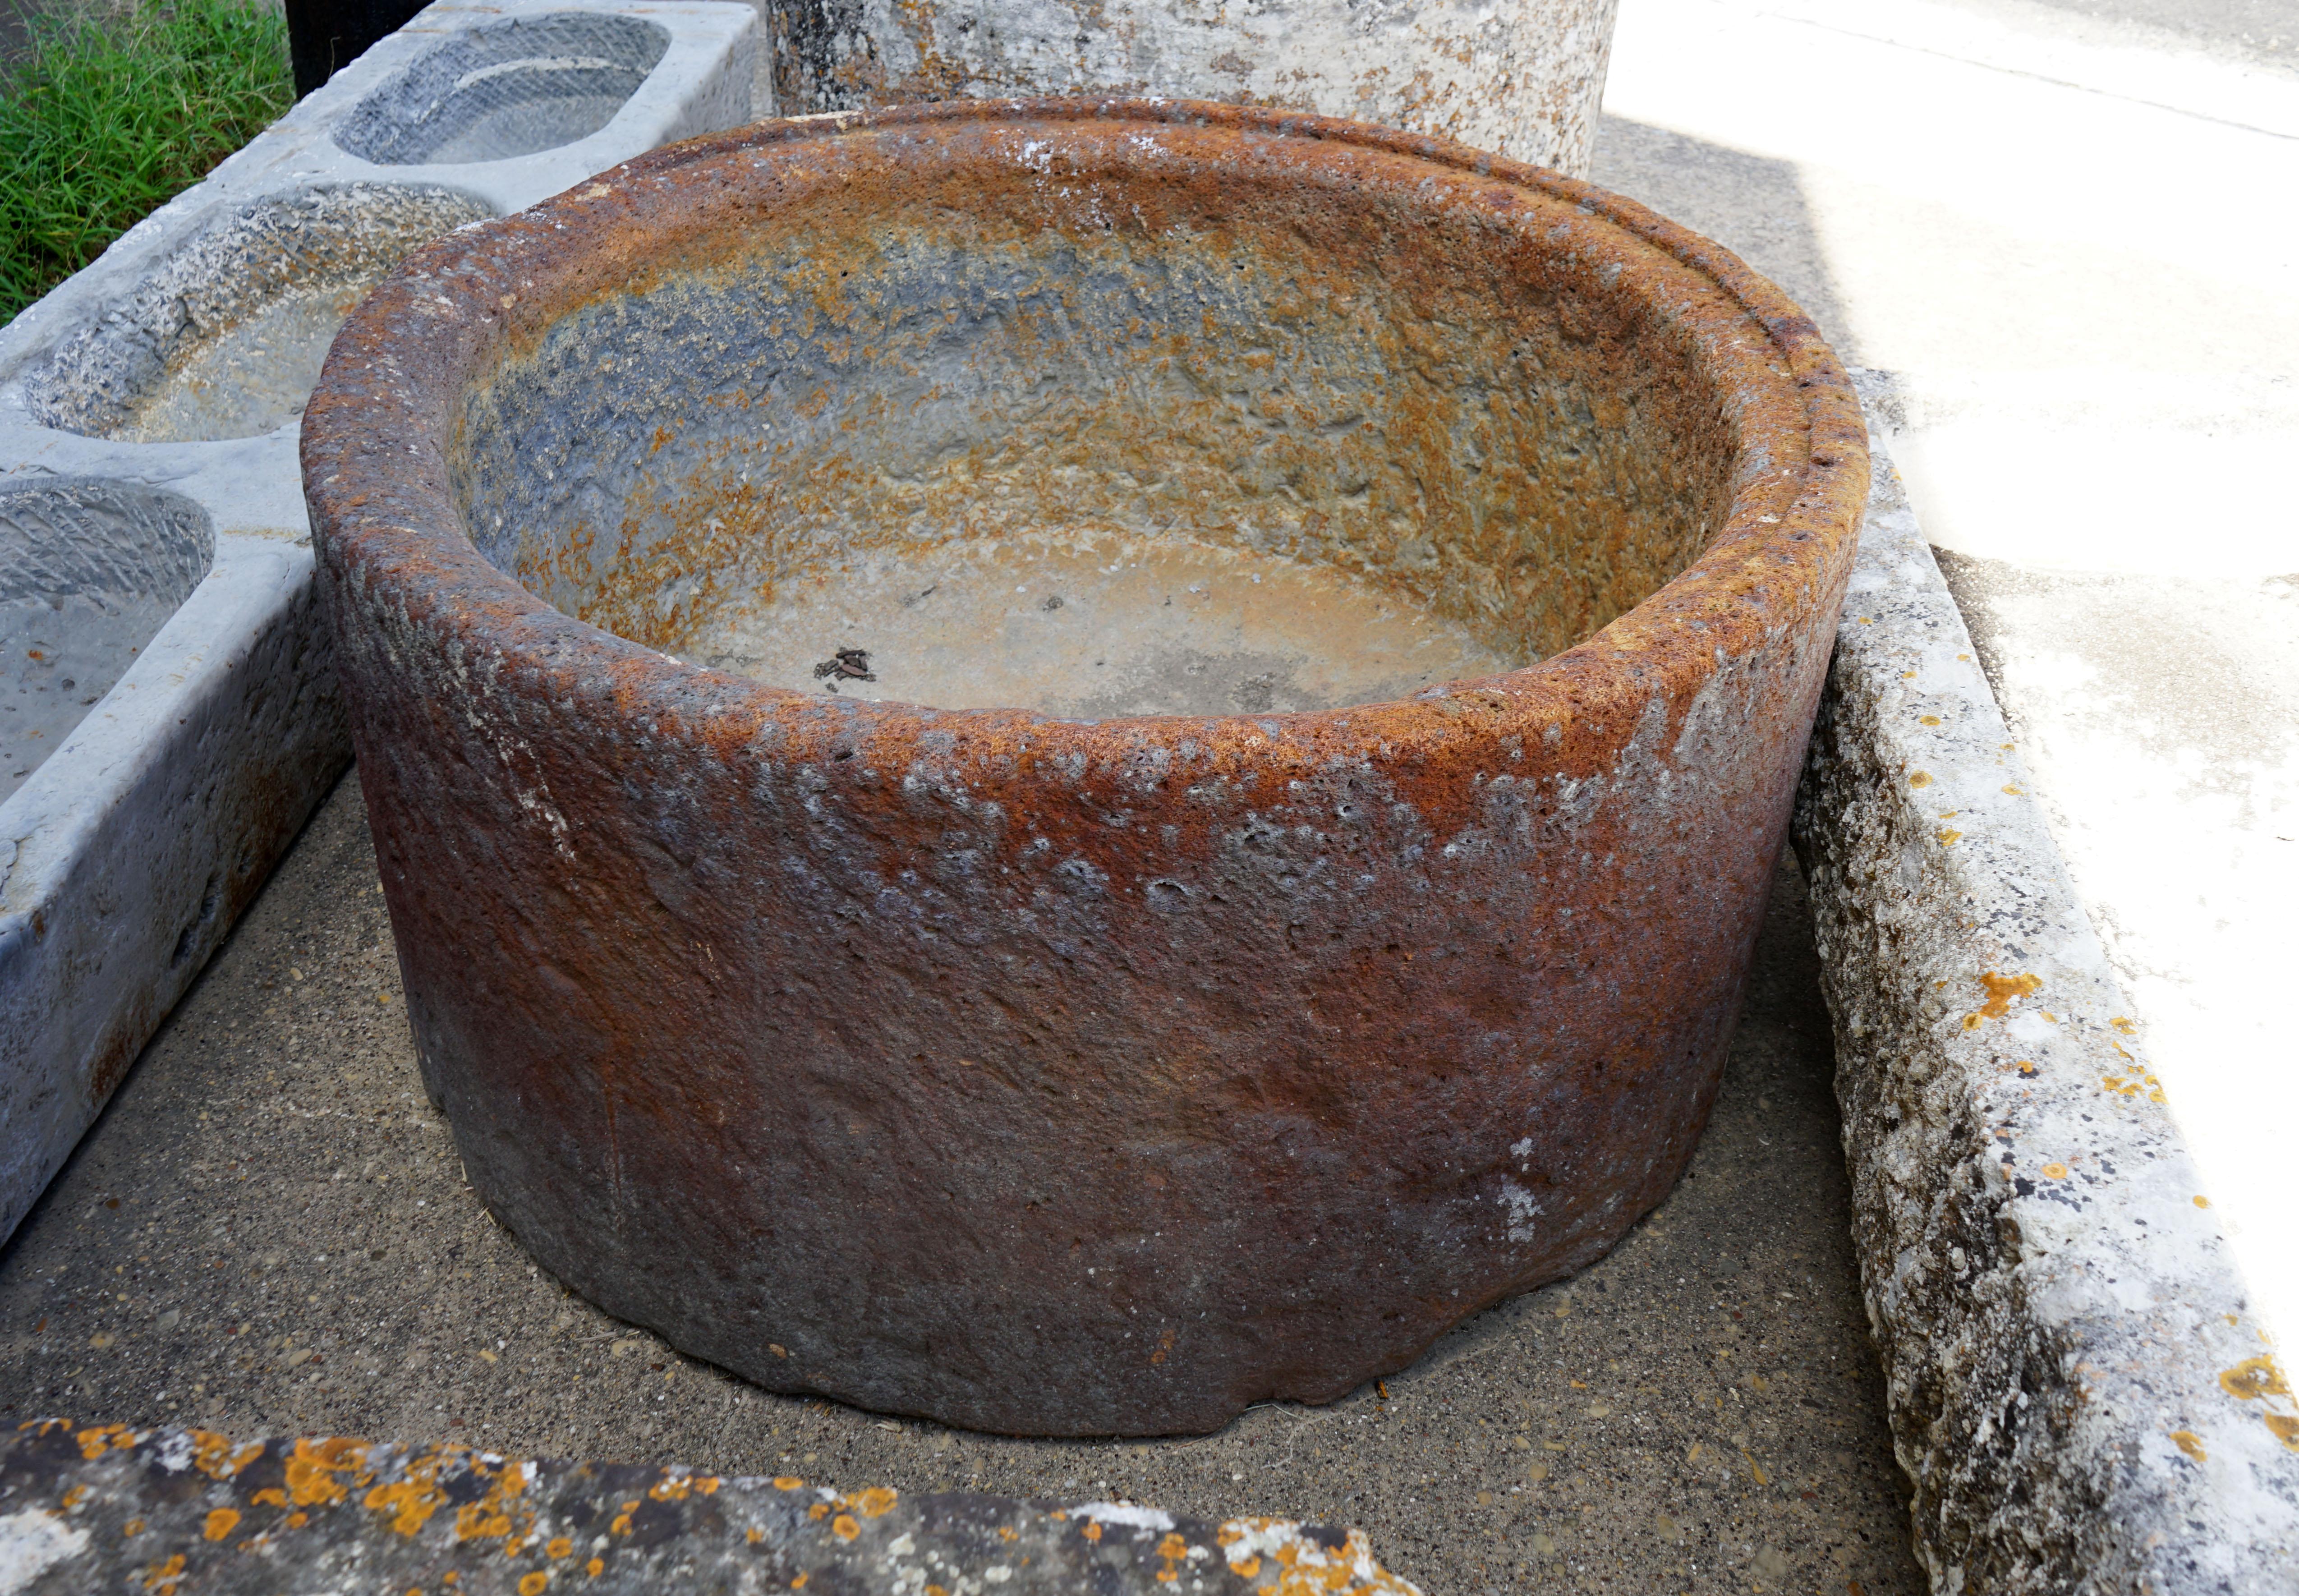 This circular trough could also function as a planter or fire pit.

Measurements: 47'' diameter 23'' high.